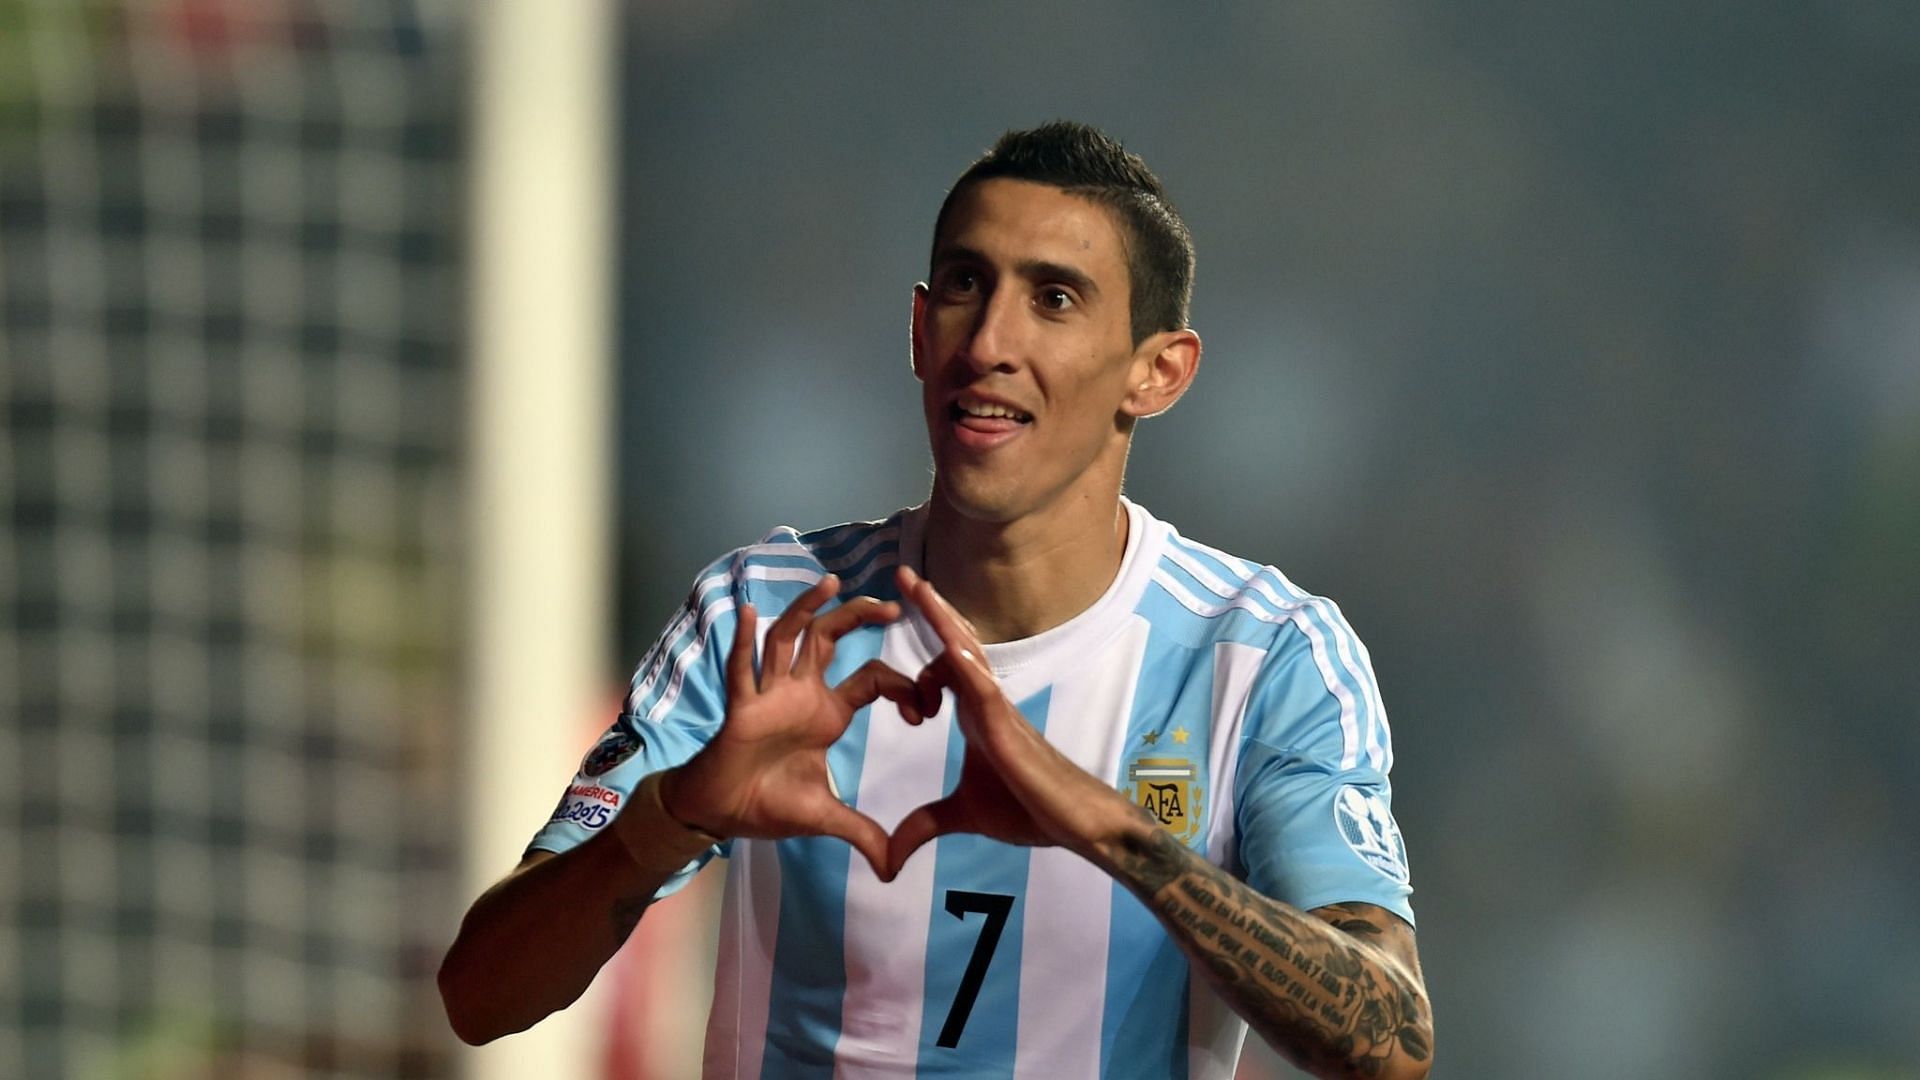 Angel Di Maria doing his trademark celebration after scoring for Argentina.